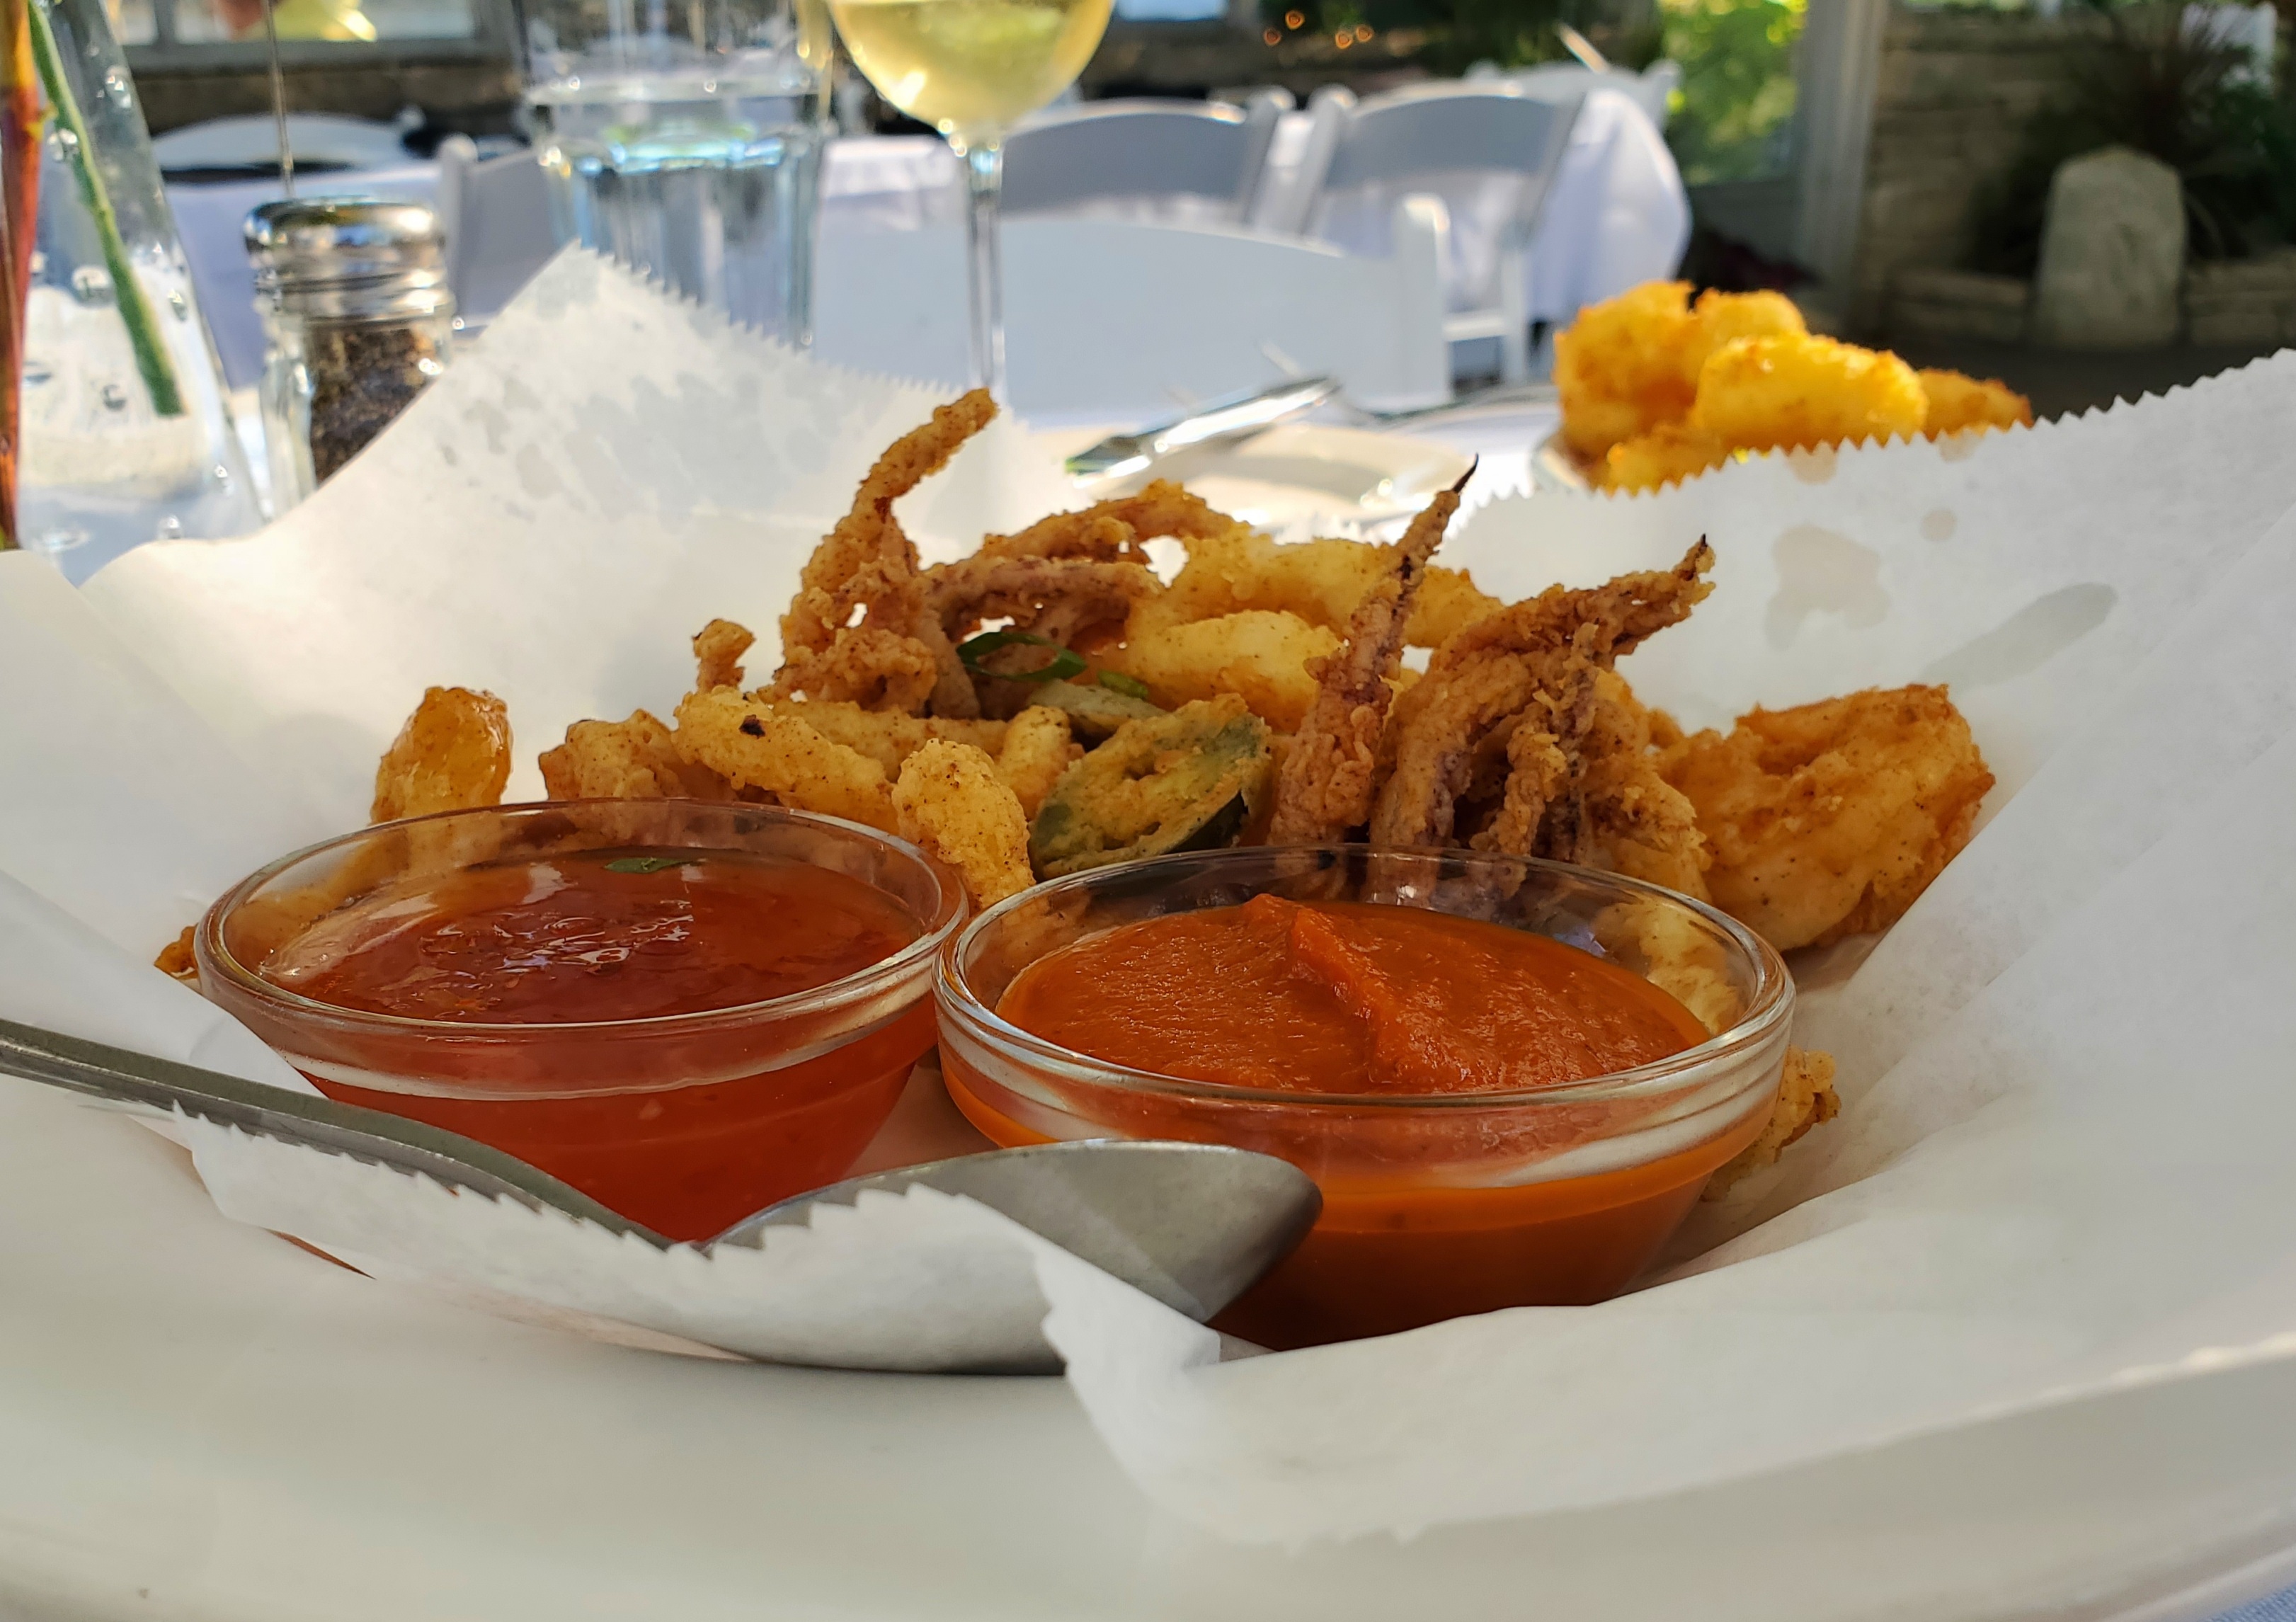 Fried shrimp and calamari are in a basket lined with parchment paper on a white table. In the basket, there are two small metal cups of dipping sauces. Photo by Carl Busch.